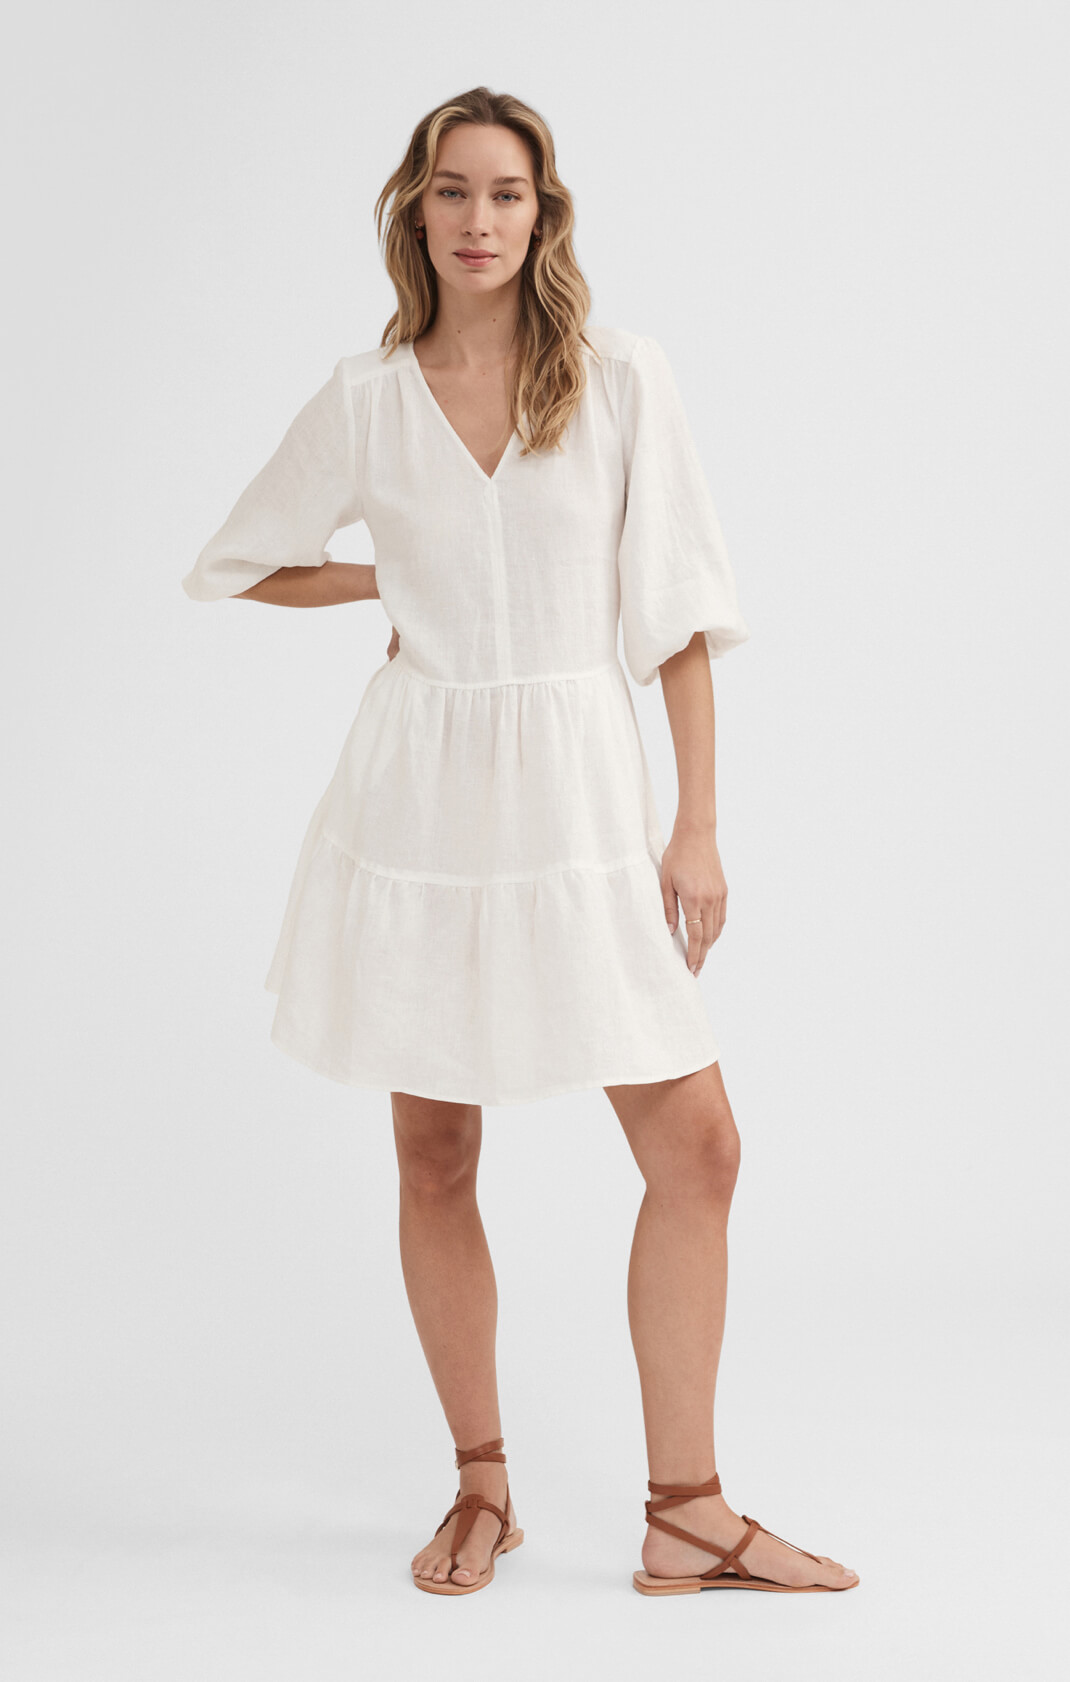 All White Outfit Ideas For Women - Witchery Style